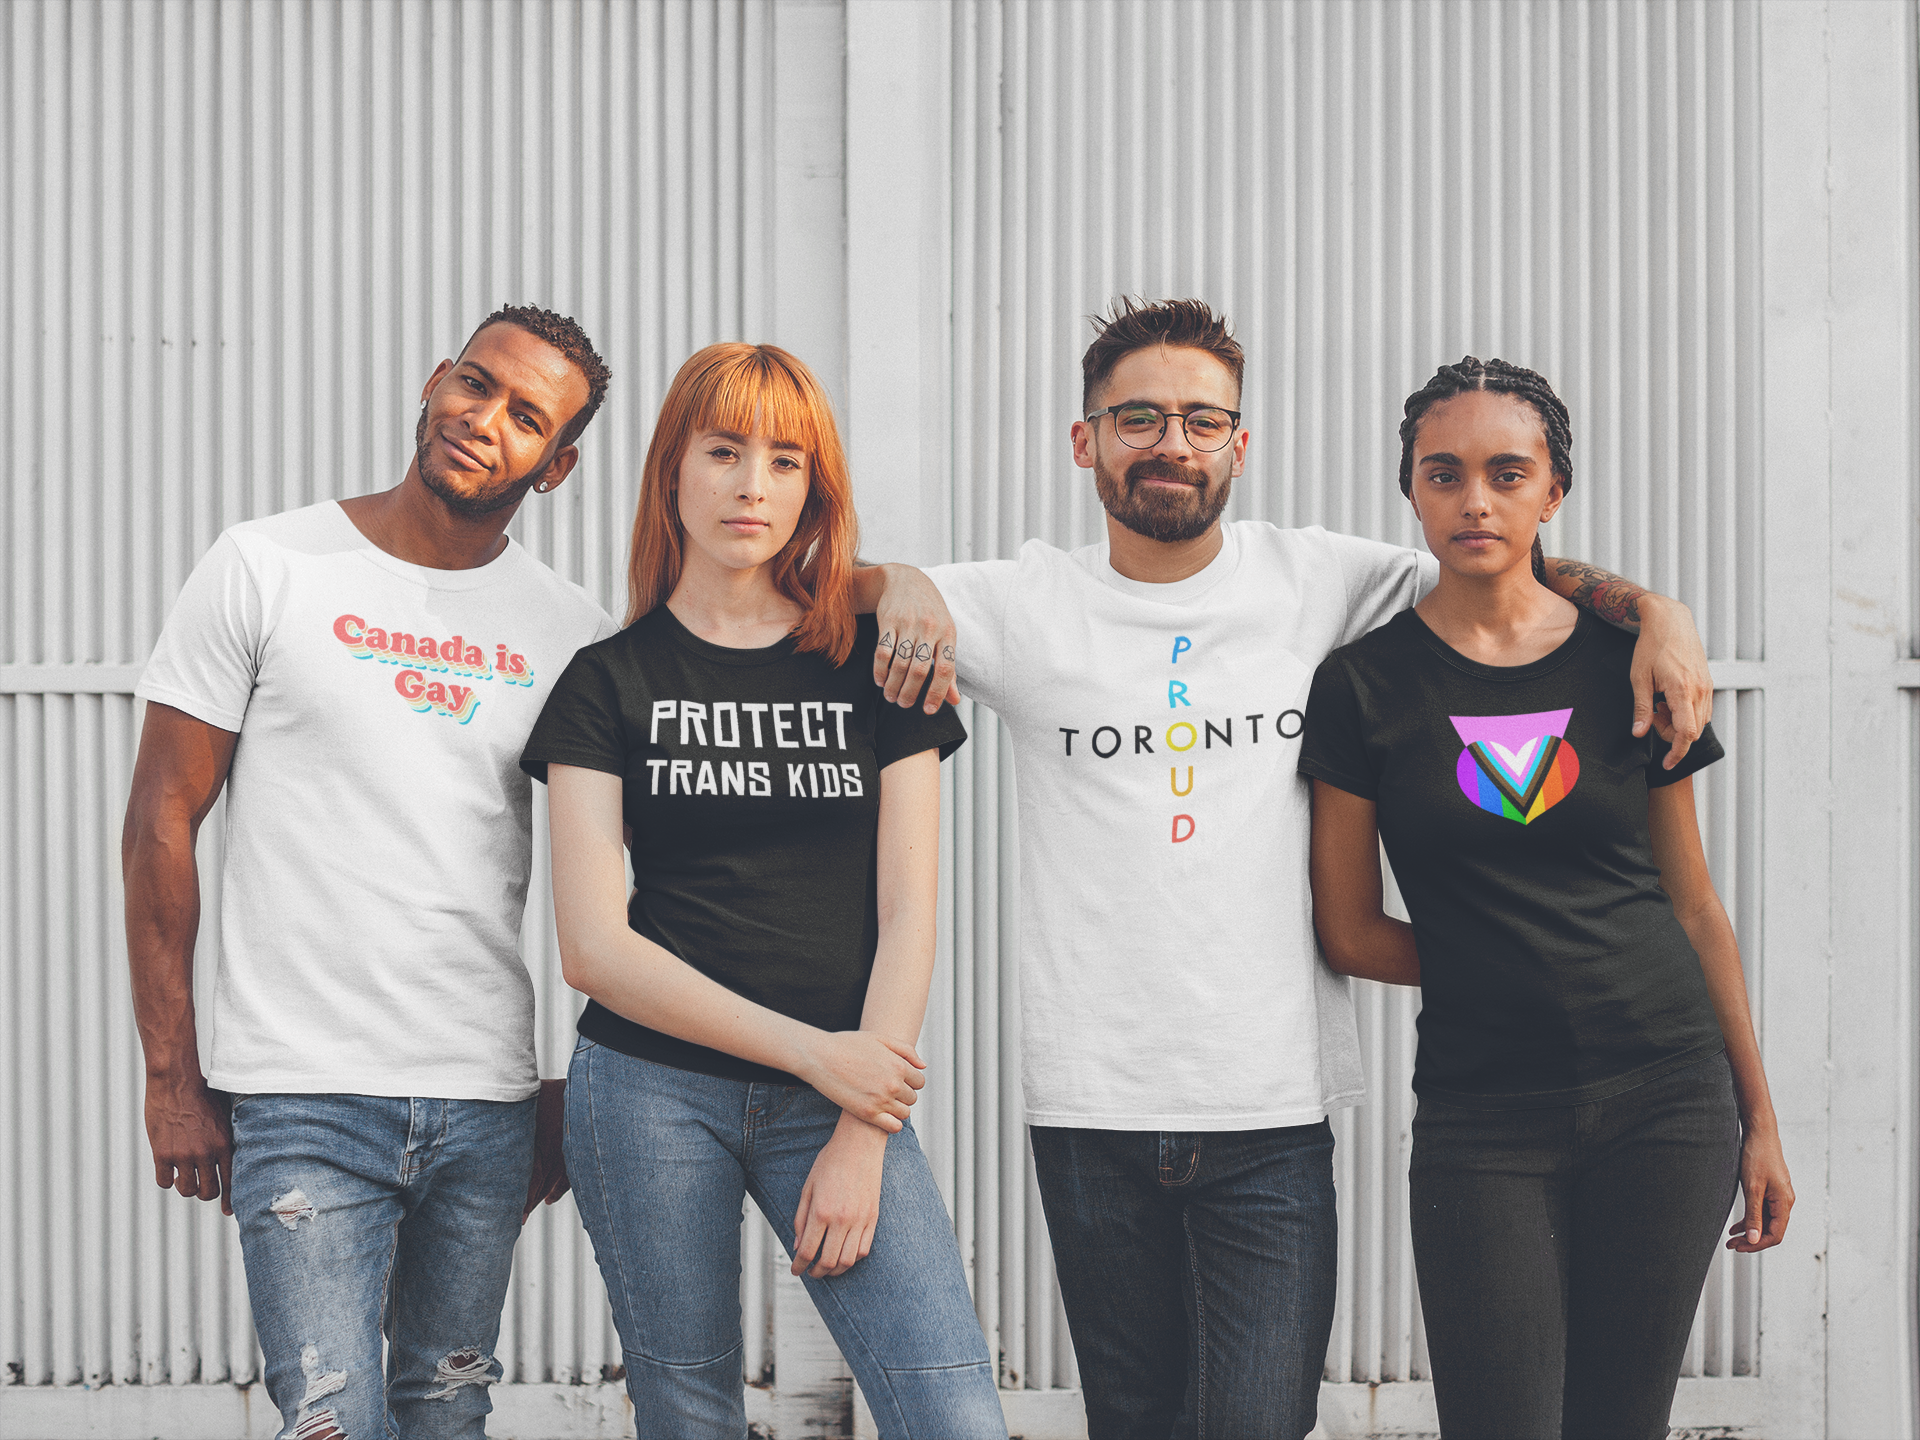 a group of four friends pose with Queer Geekery t-shirts on. On the left is a white tee that says "Canada is gay" in retro lettering; to the right of that, a black tshirt with "protect trans kids" in white text; to the right of that a white tshirt with "Toronto Proud" in colourful lettering; then a black shirt with the pink progress pride heart design. 